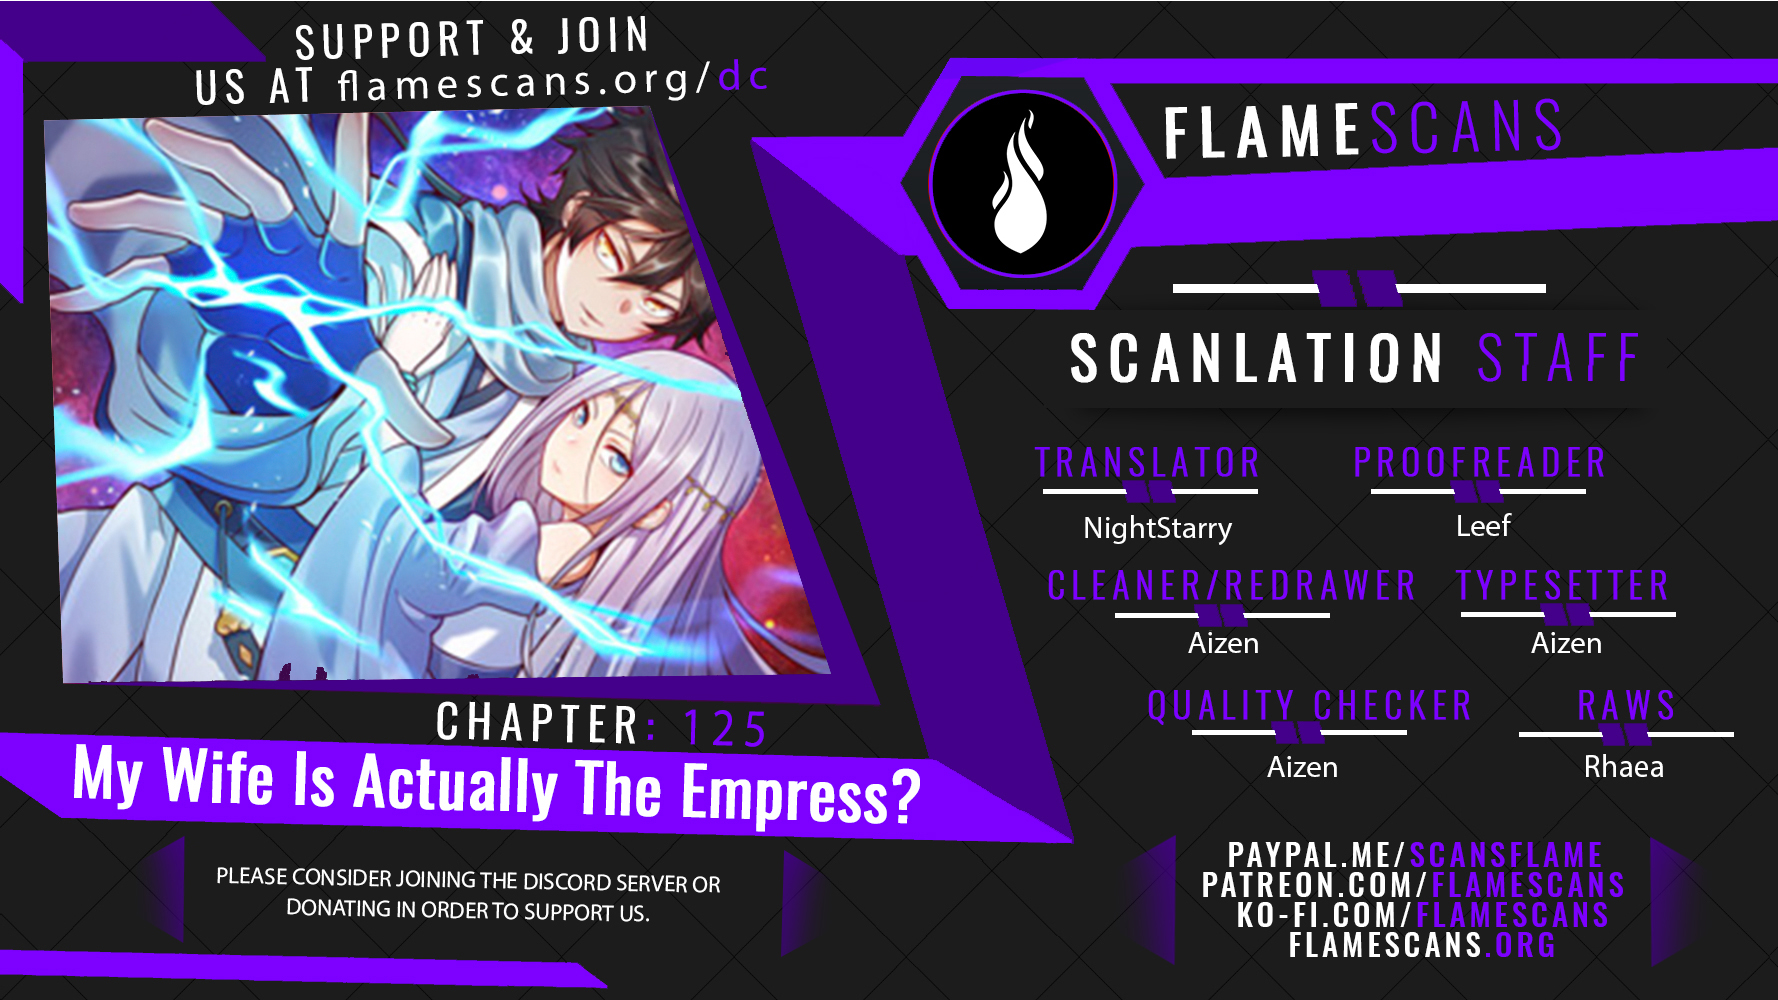 My Wife Is Actually The Empress? - Chapter 28170 - Image 1